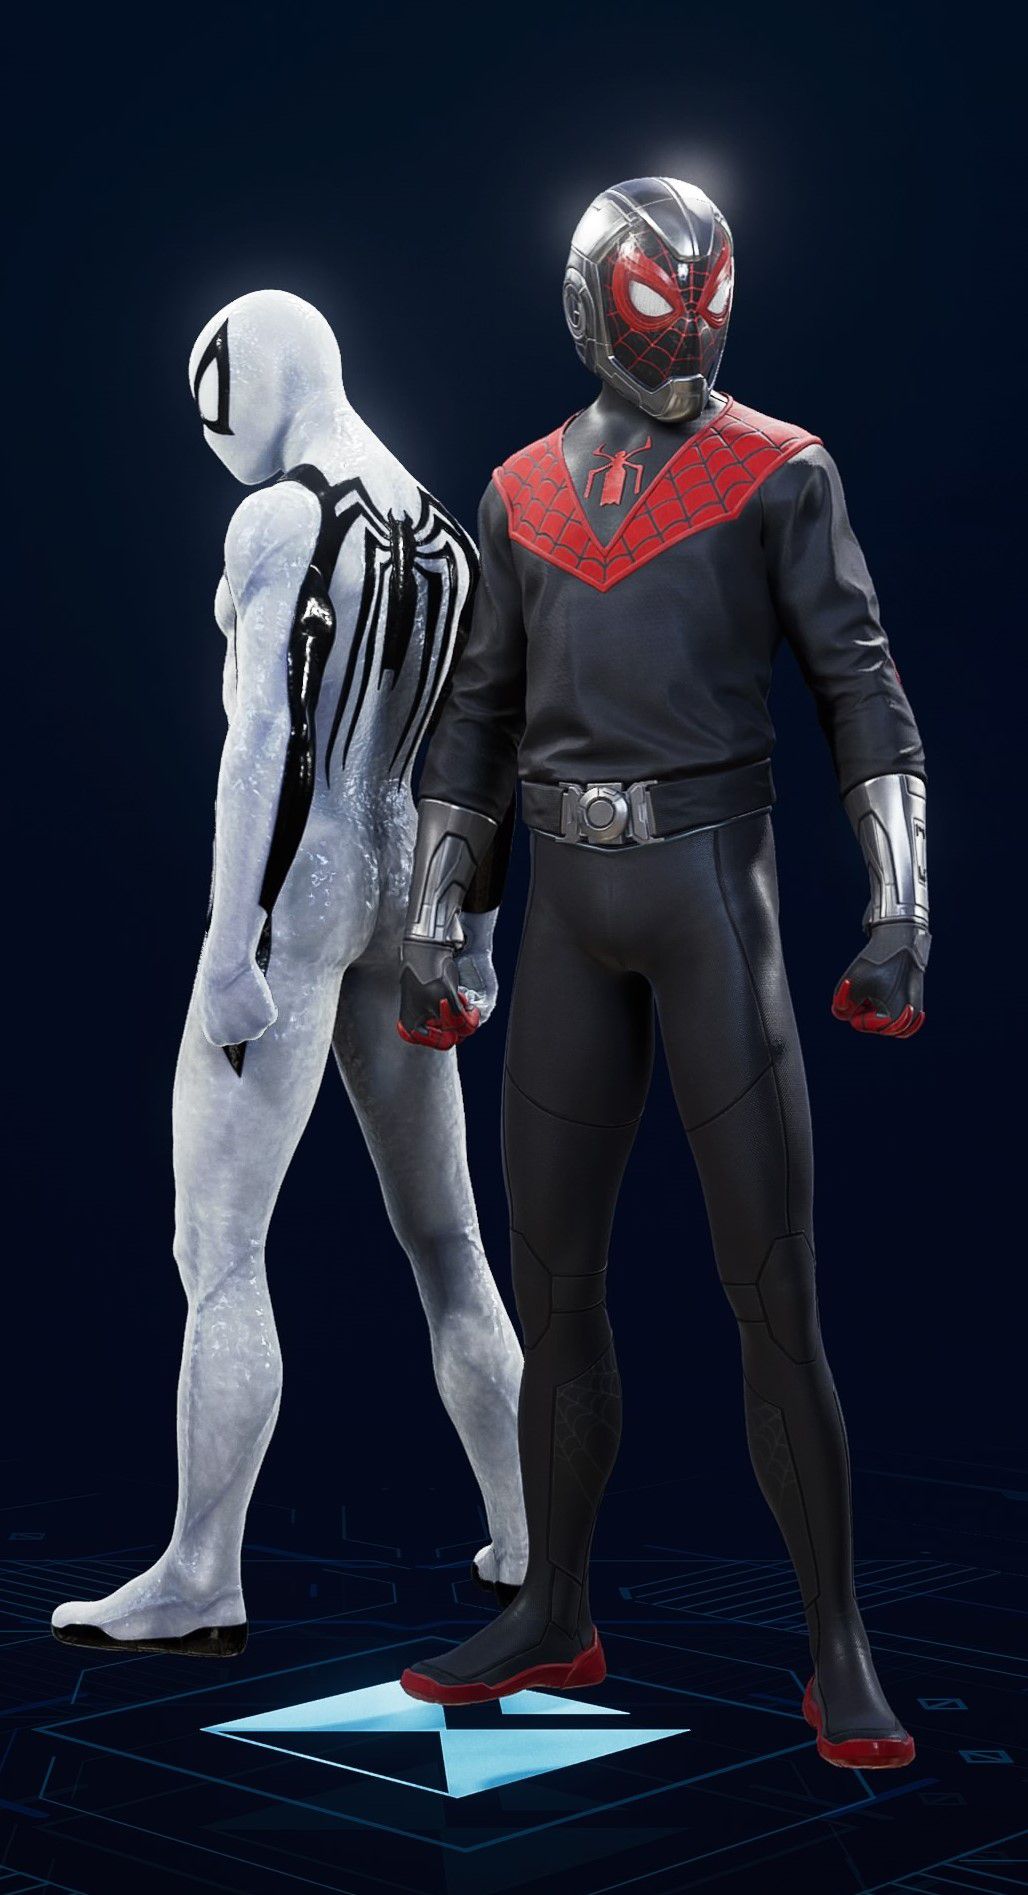 Miles Morales stands in his Life Story Suit in the suit selection screen of Spider-Man 2.